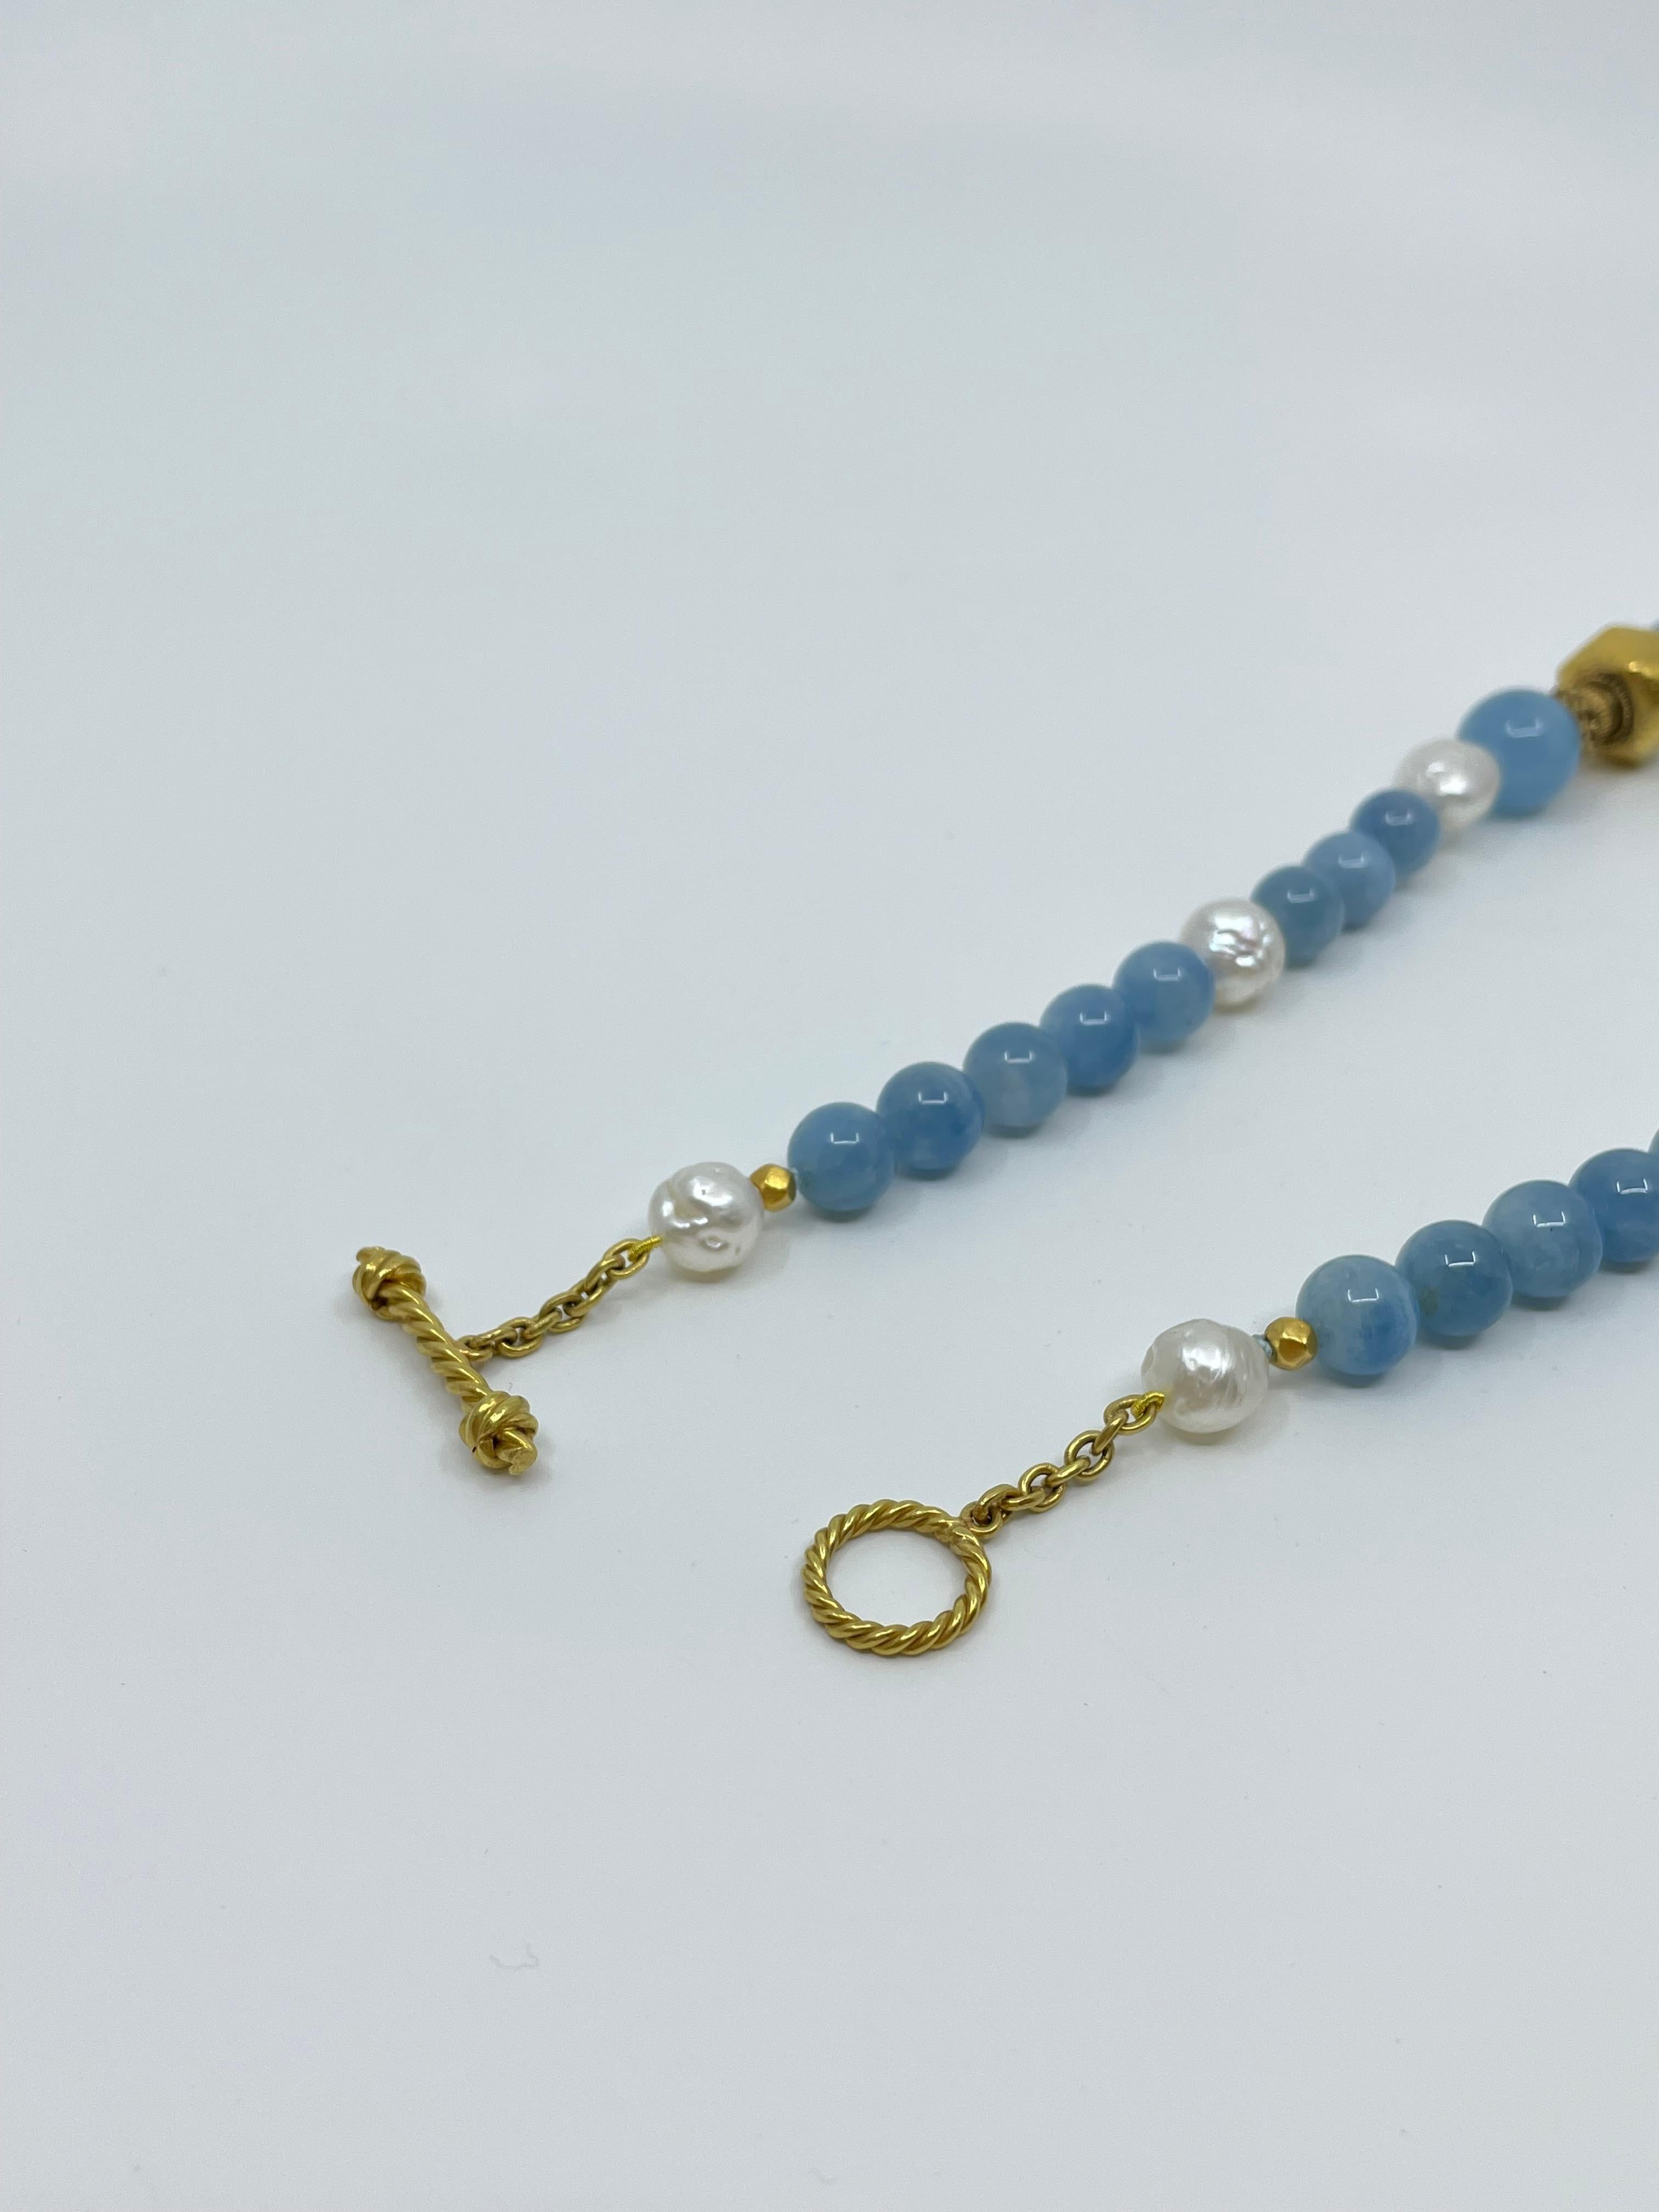 Necklace with Aquamarine, South Sea Pearls, Gold & 18K Solid Gold Beads For Sale 7